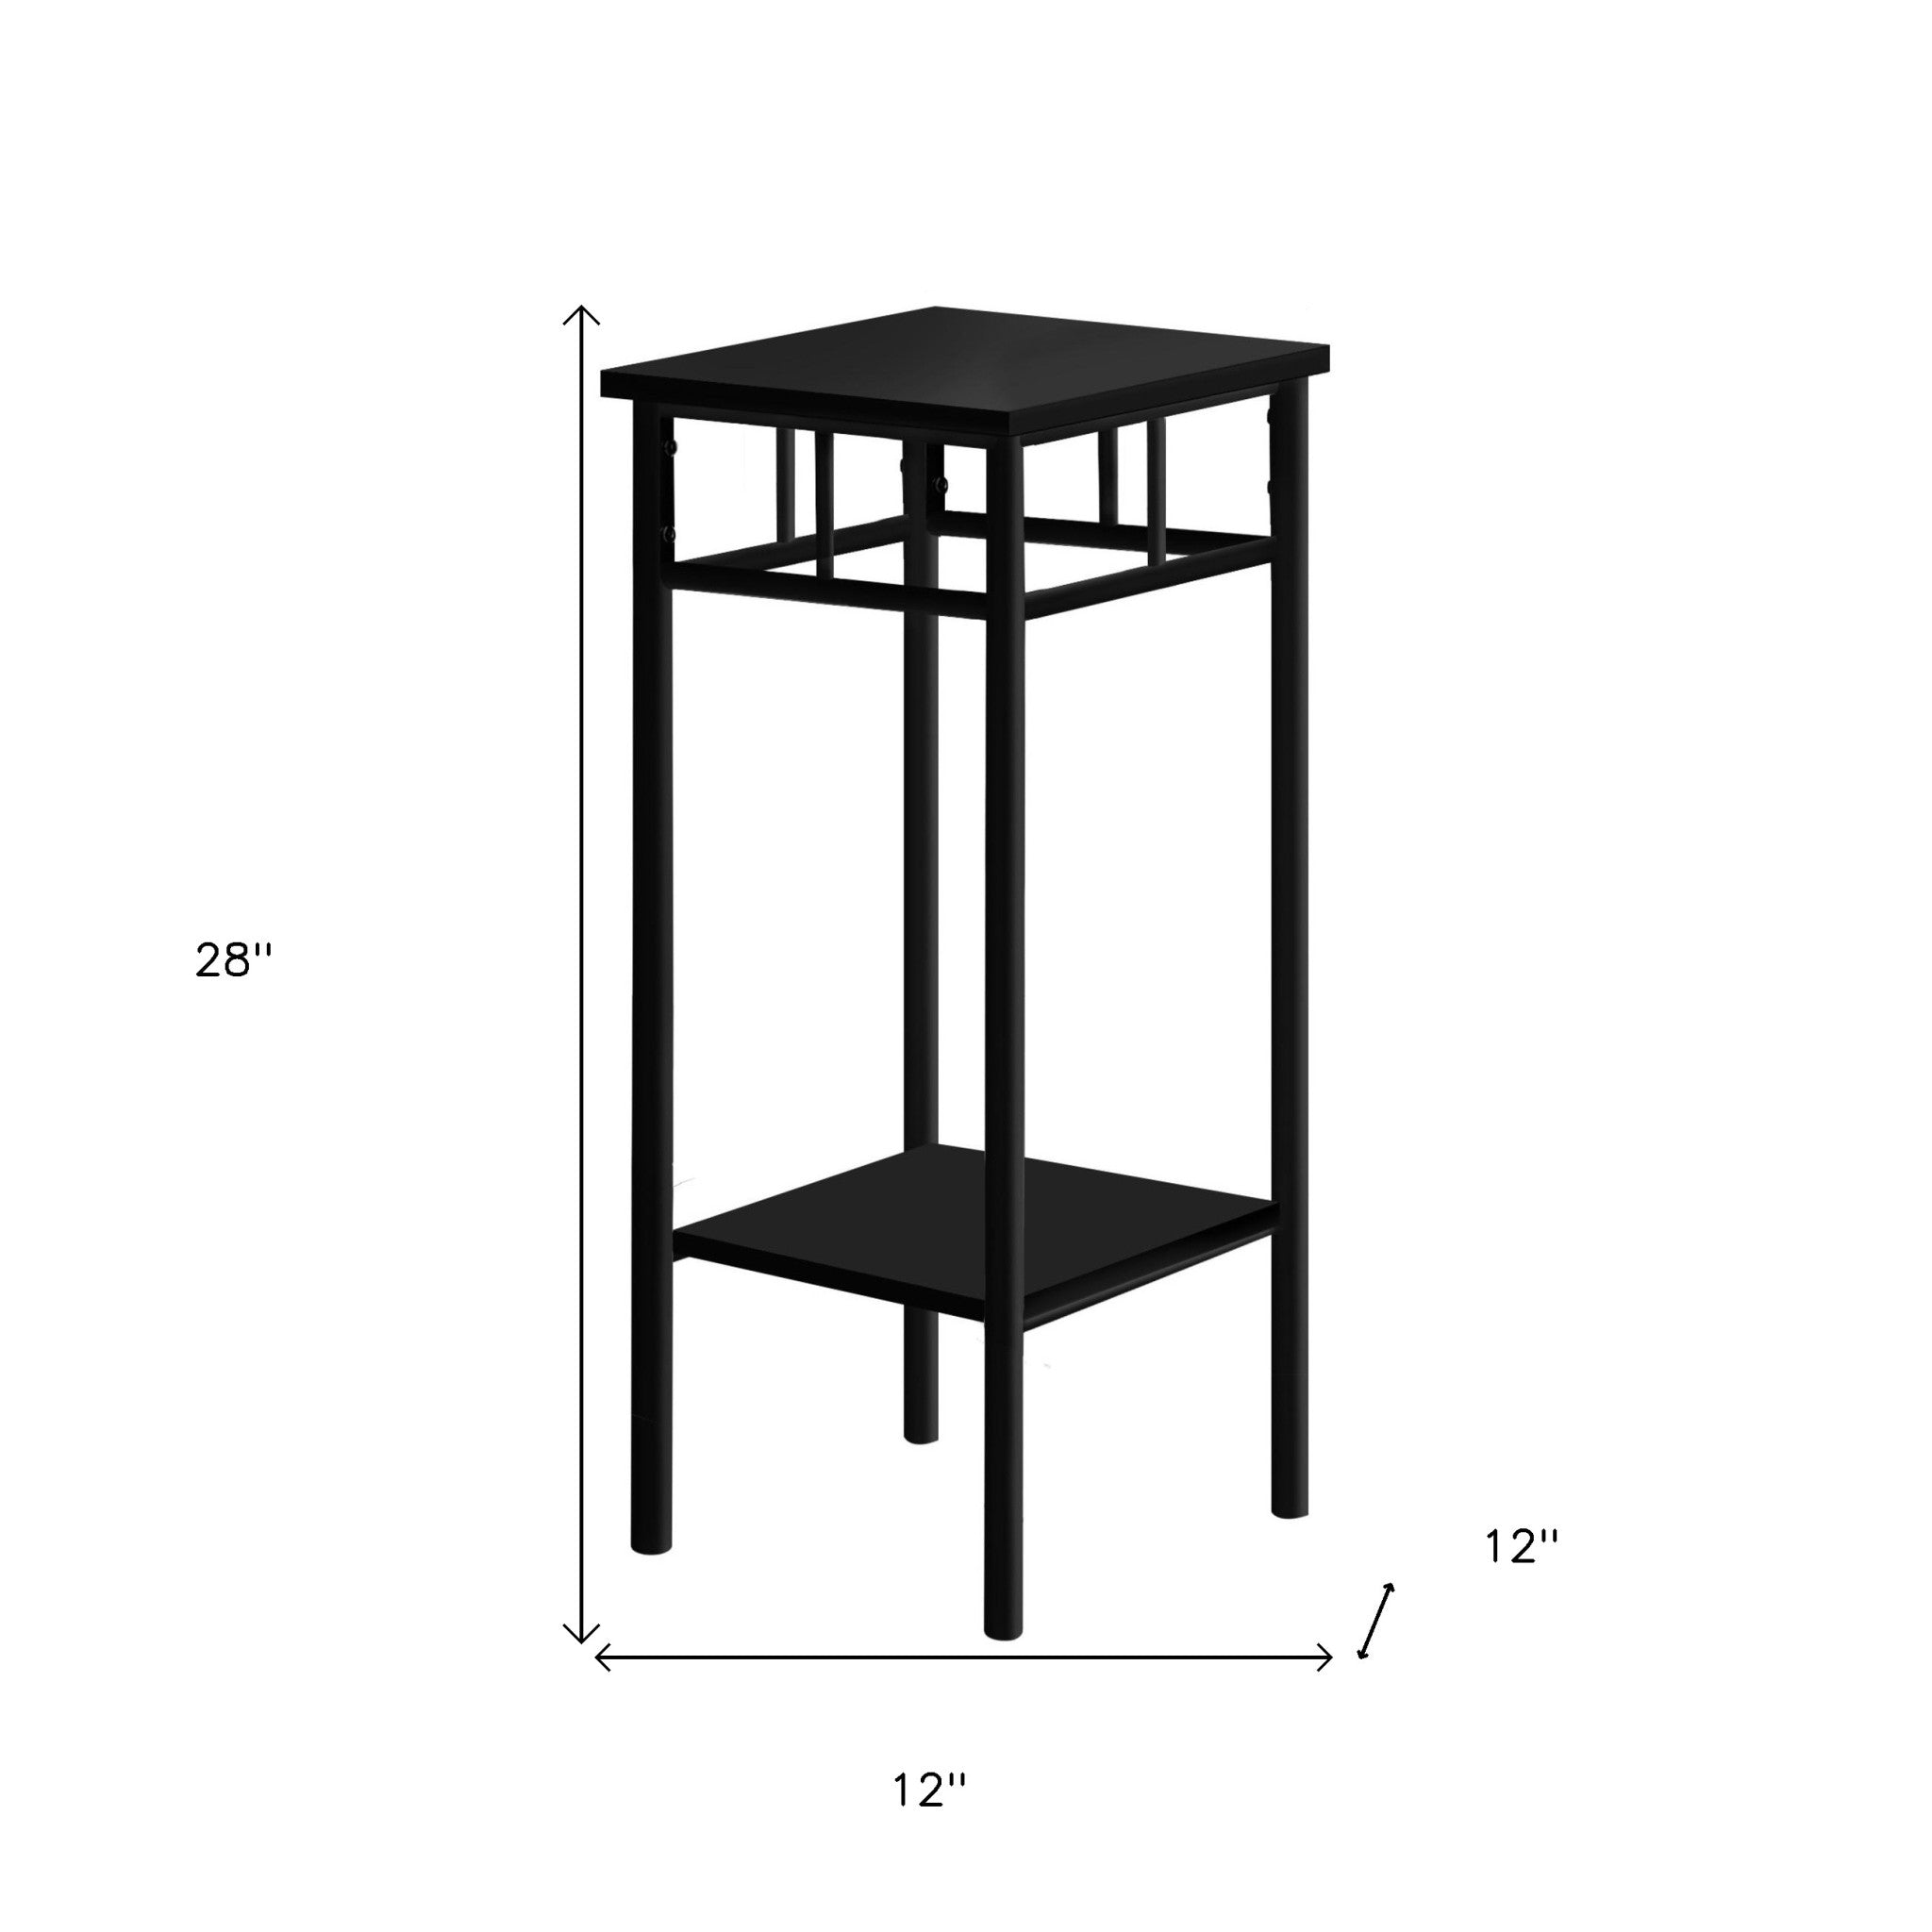 28" Black End Table With Shelf